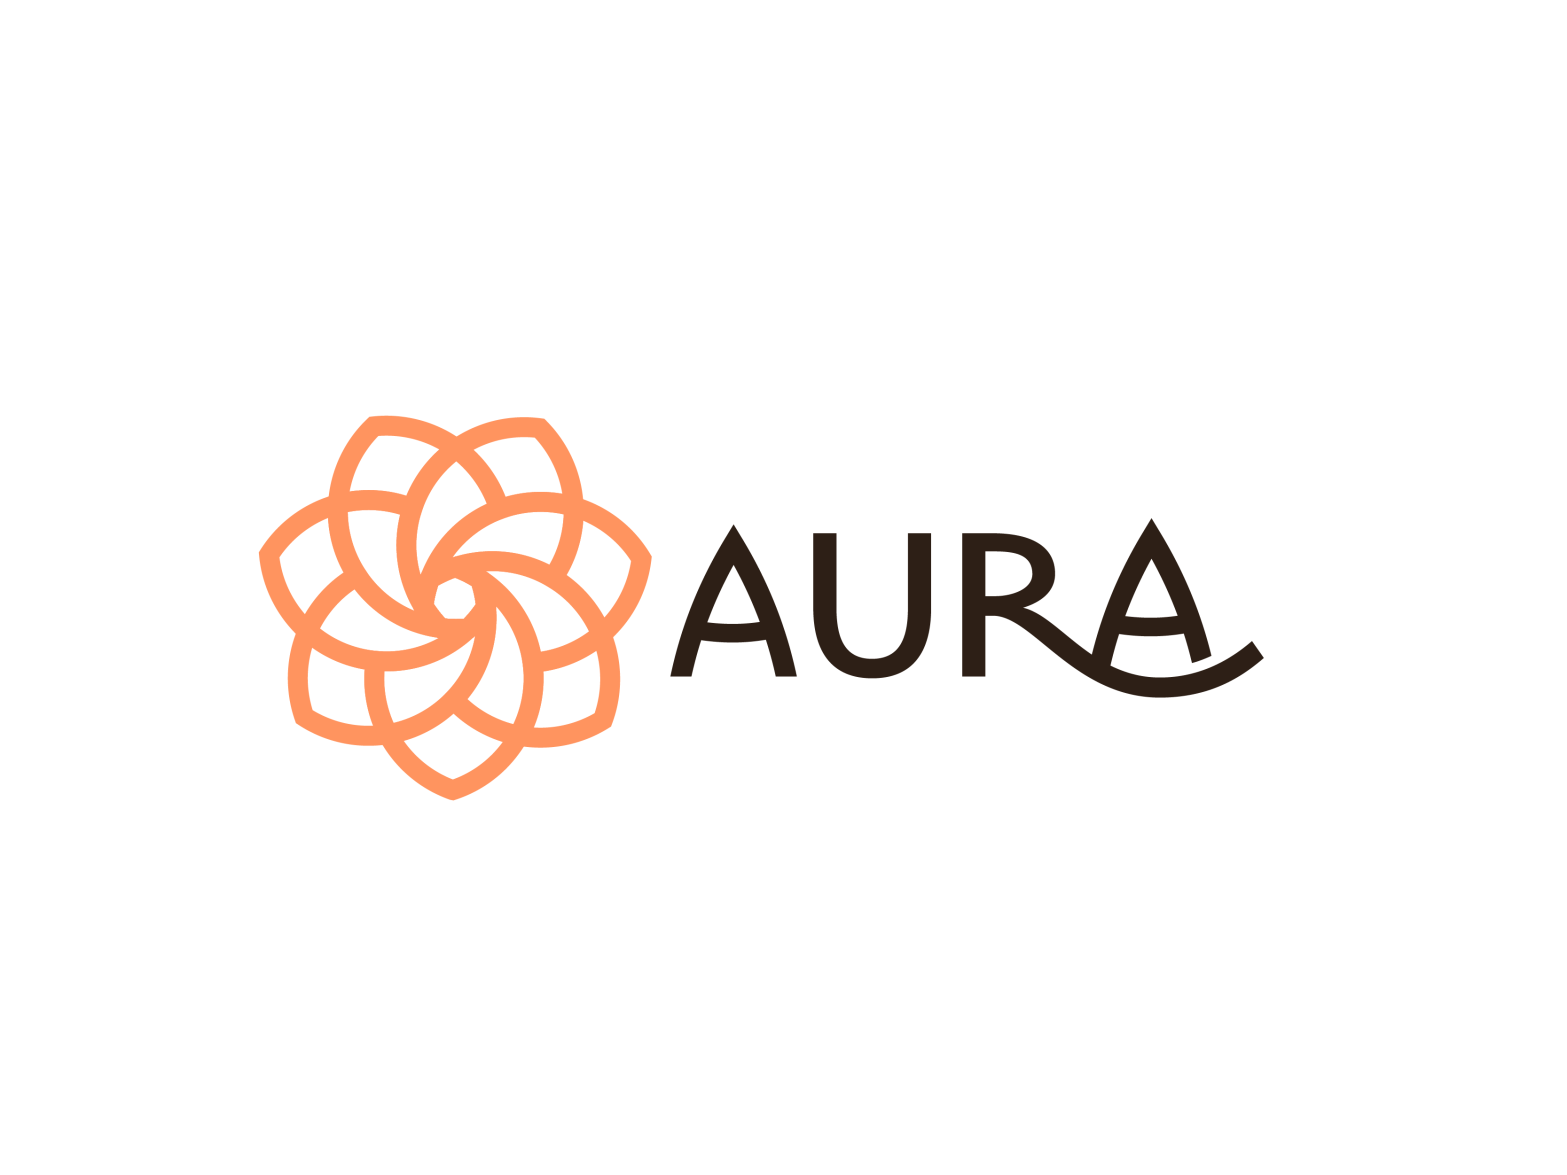 AURA by Robert Nowland on Dribbble